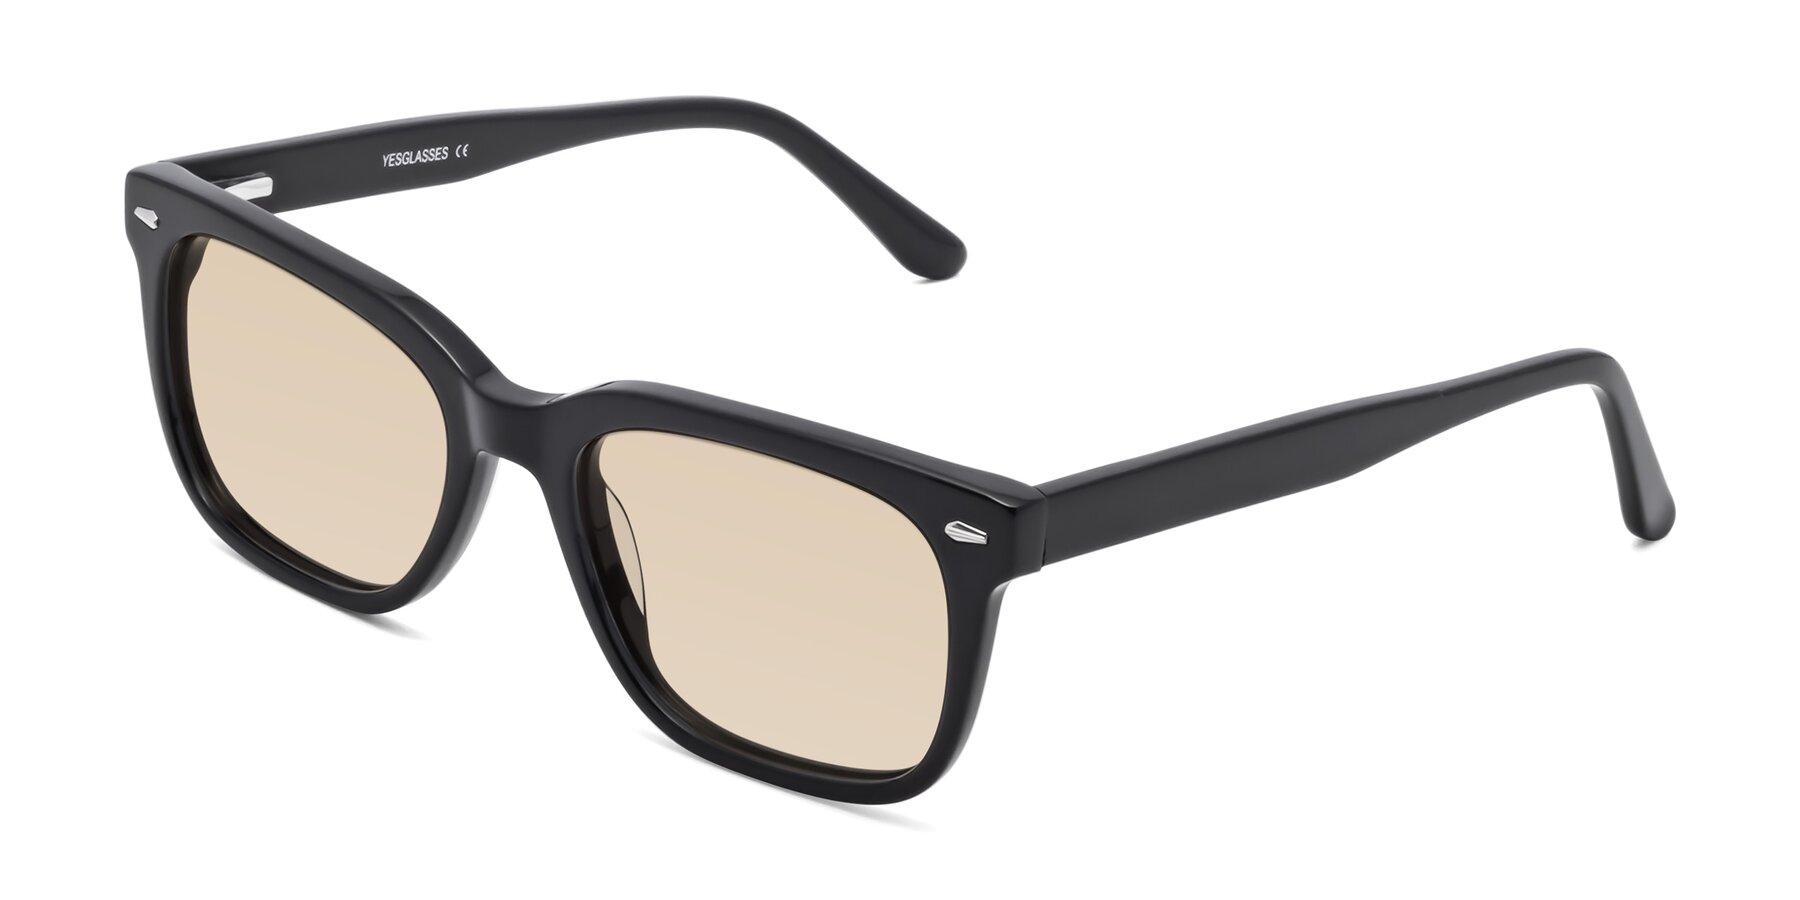 Angle of 1052 in Black with Light Brown Tinted Lenses